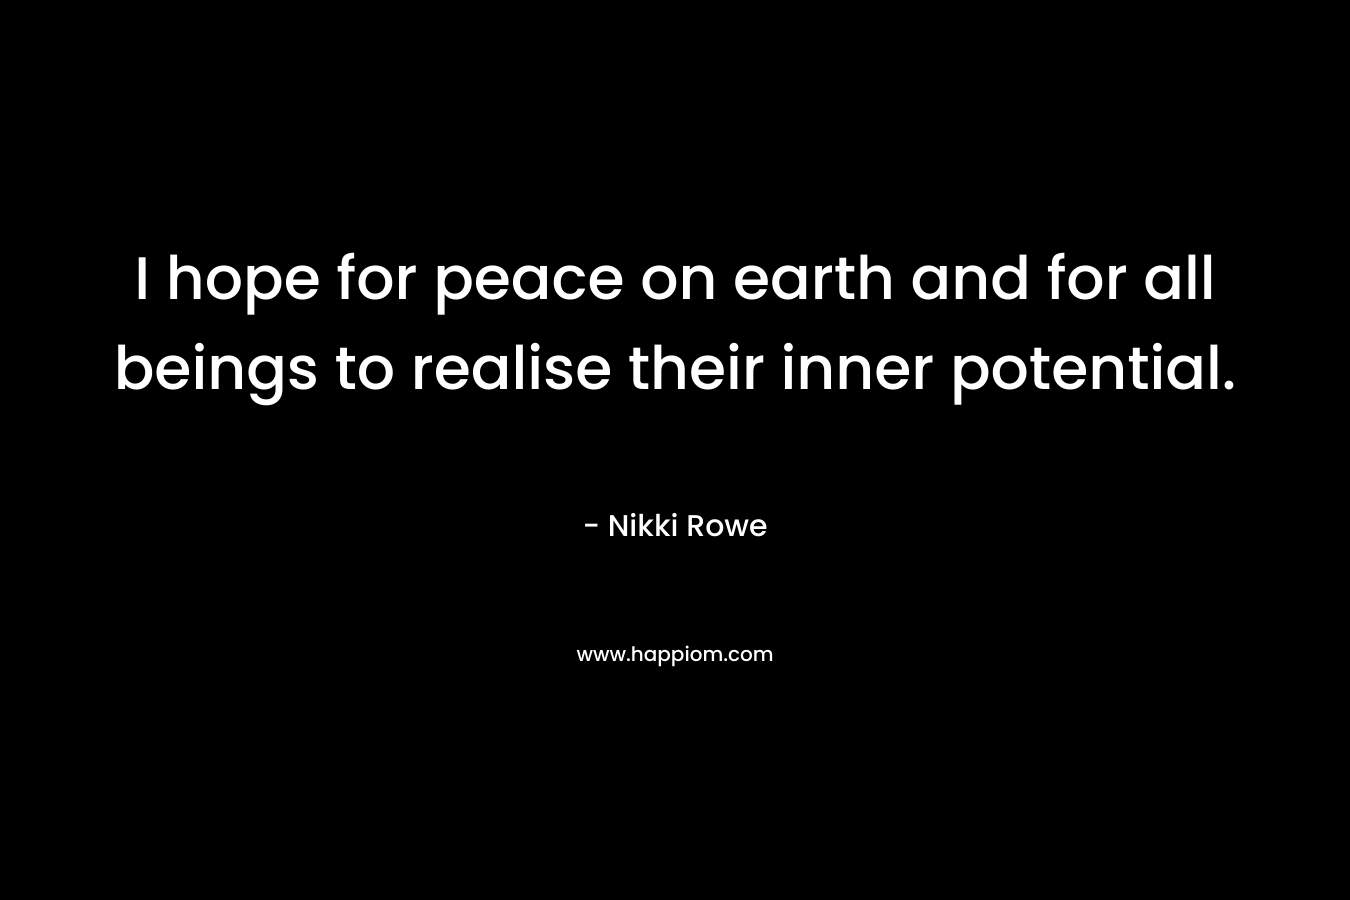 I hope for peace on earth and for all beings to realise their inner potential.